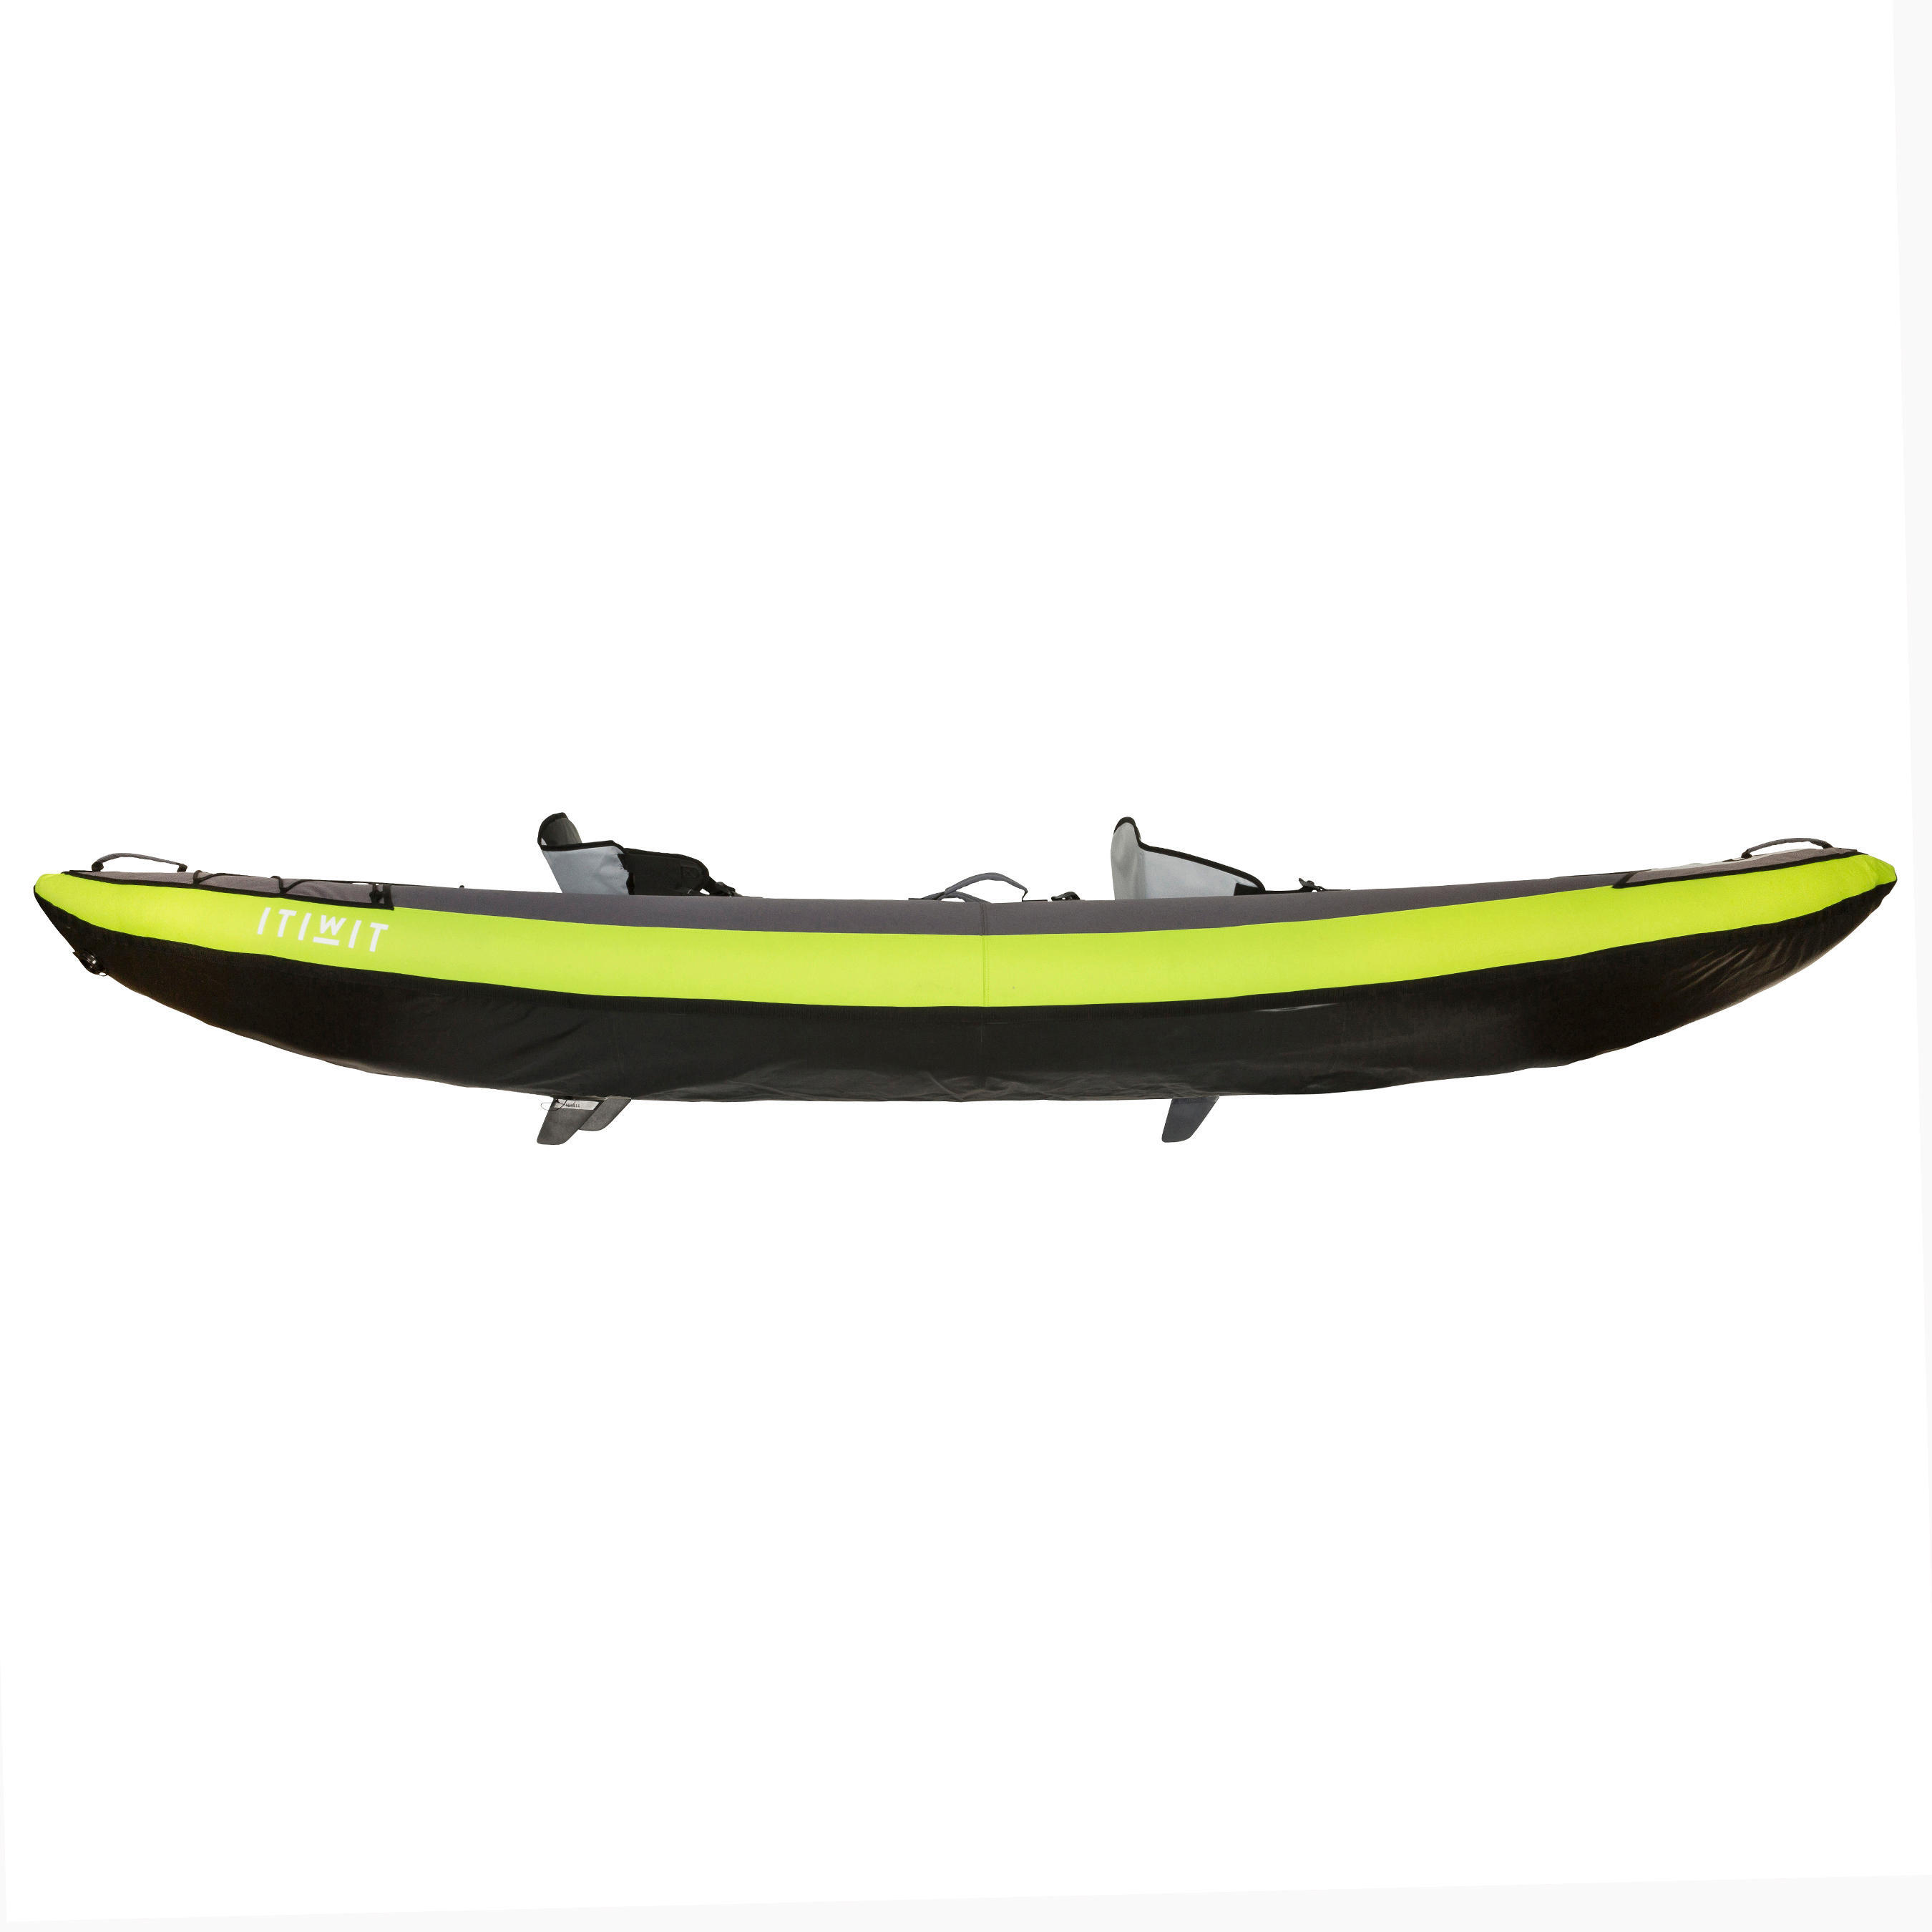 Itiwit Inflatable Touring Kayak w/ Pump 2 person 2/8